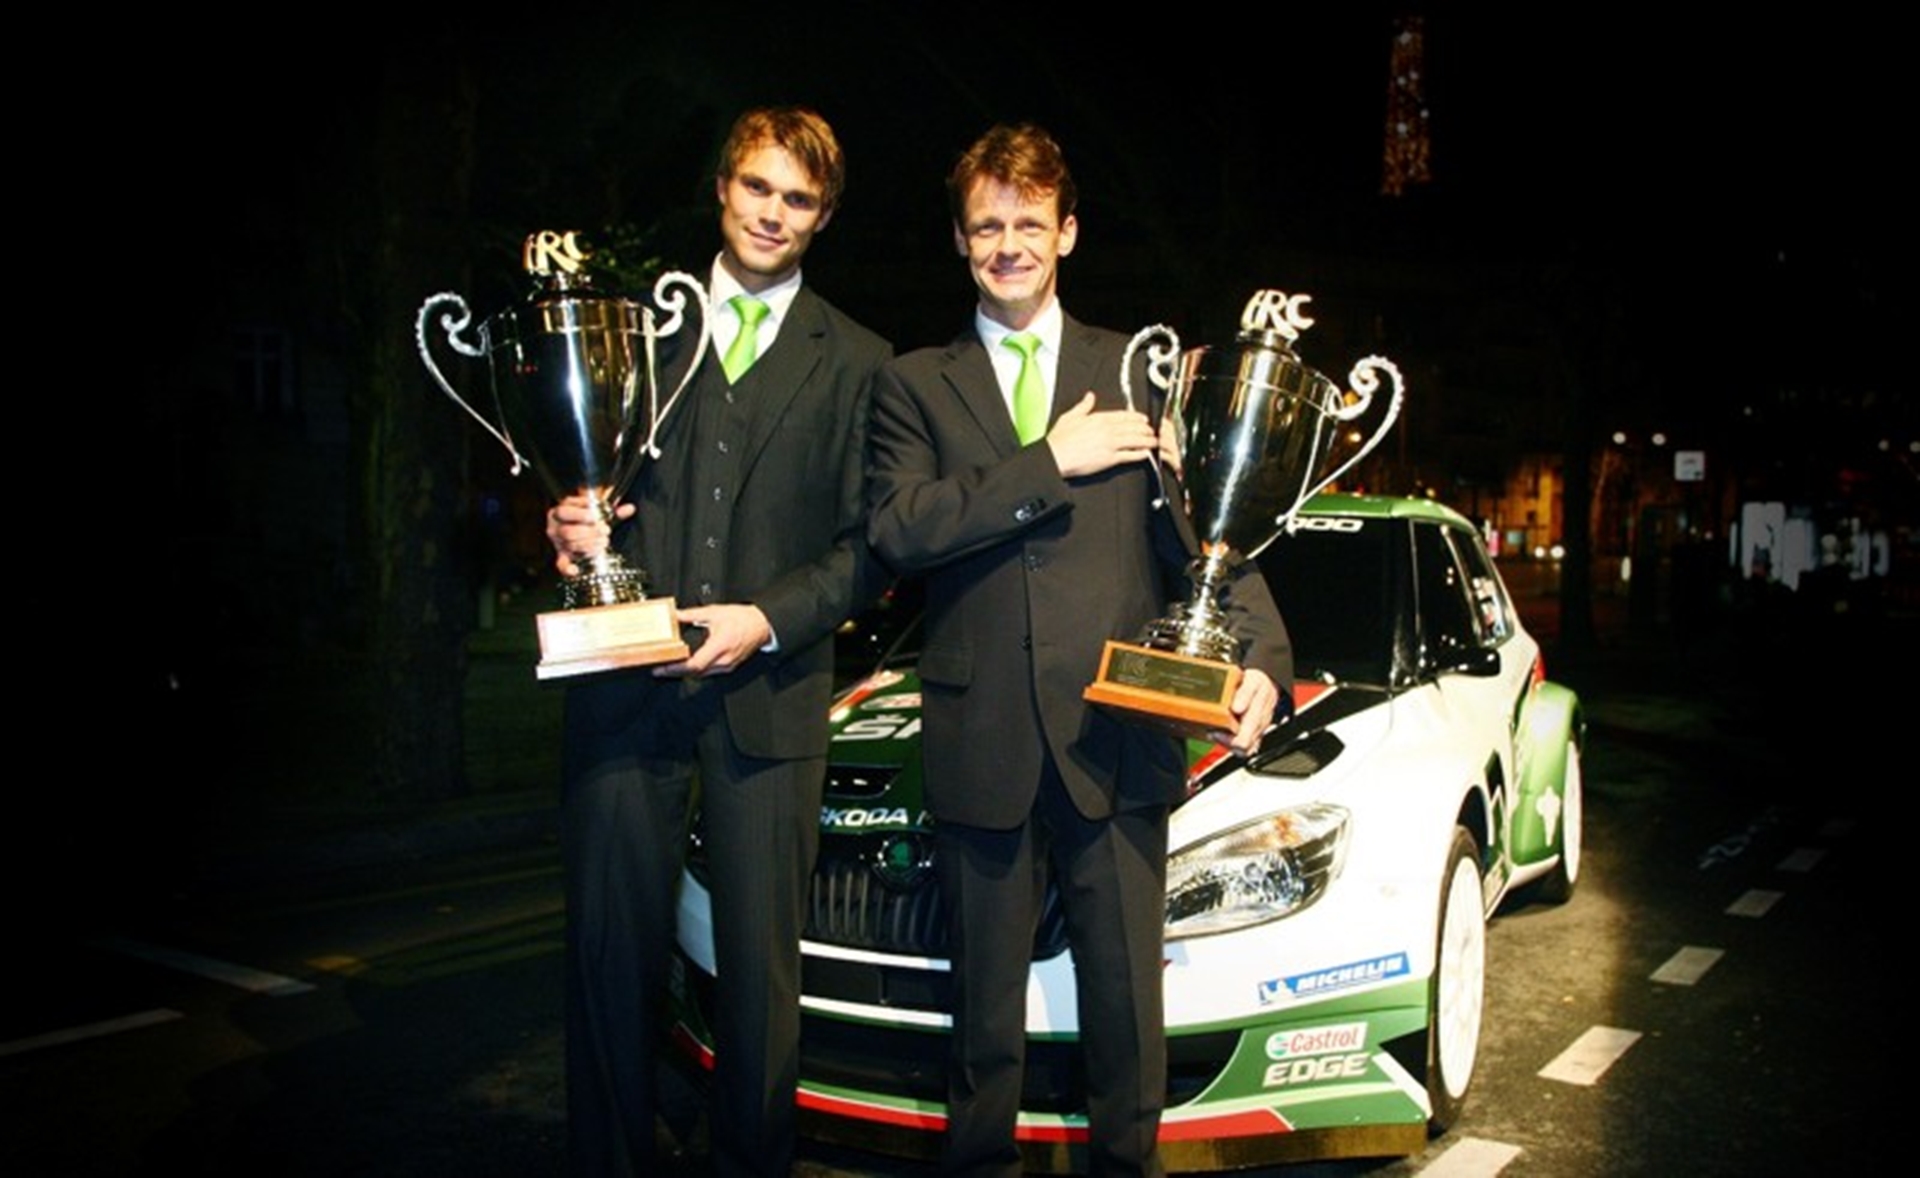 ANDREAS COLLECTS IRC DRIVERS’ TROPHY IN PARIS